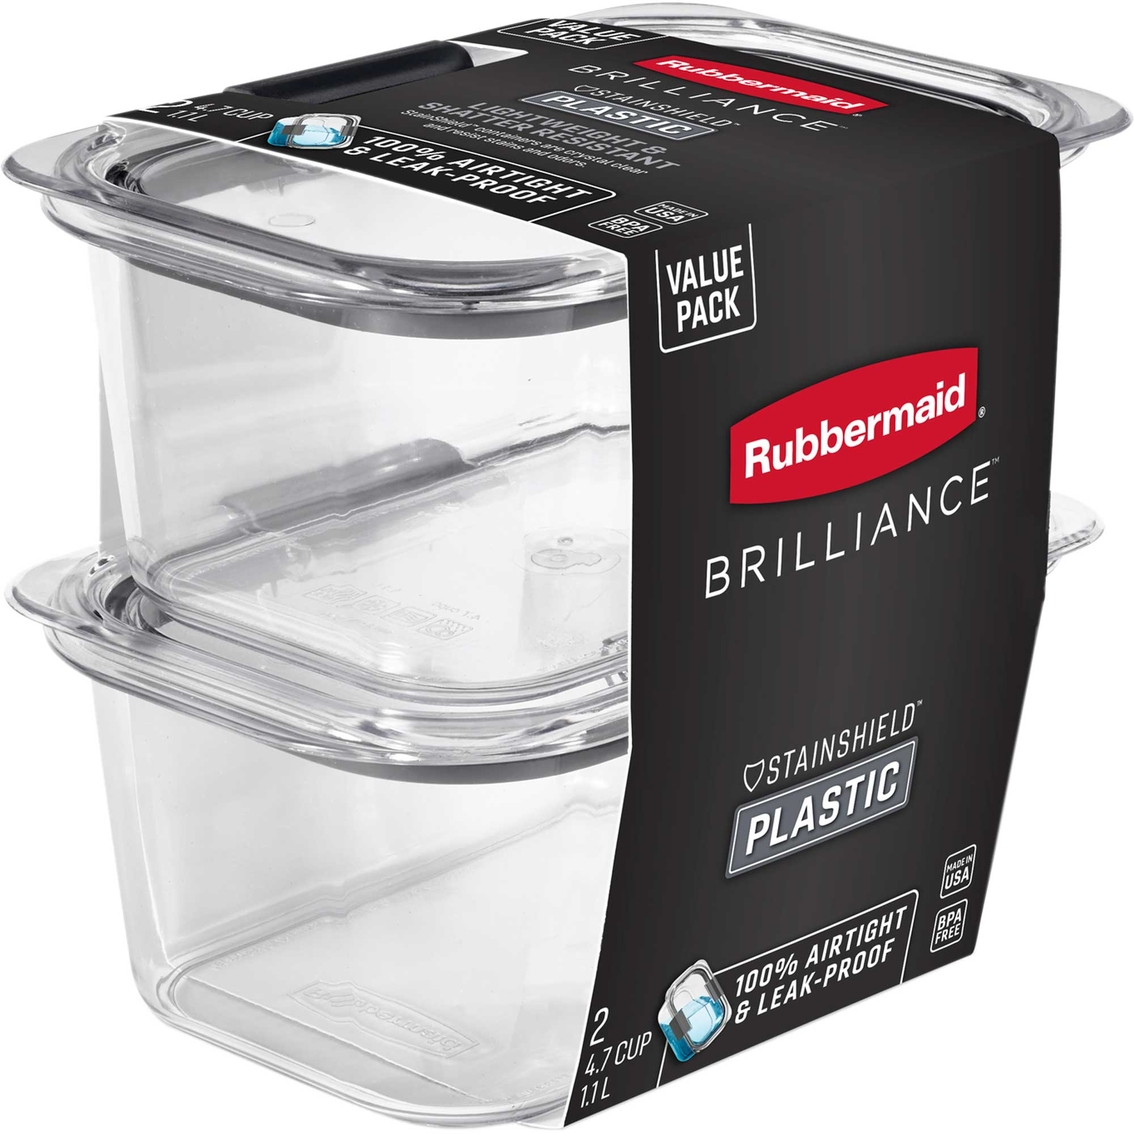 Rubbermaid Brilliance Container with Lid Deep Medium 4.7 Cups